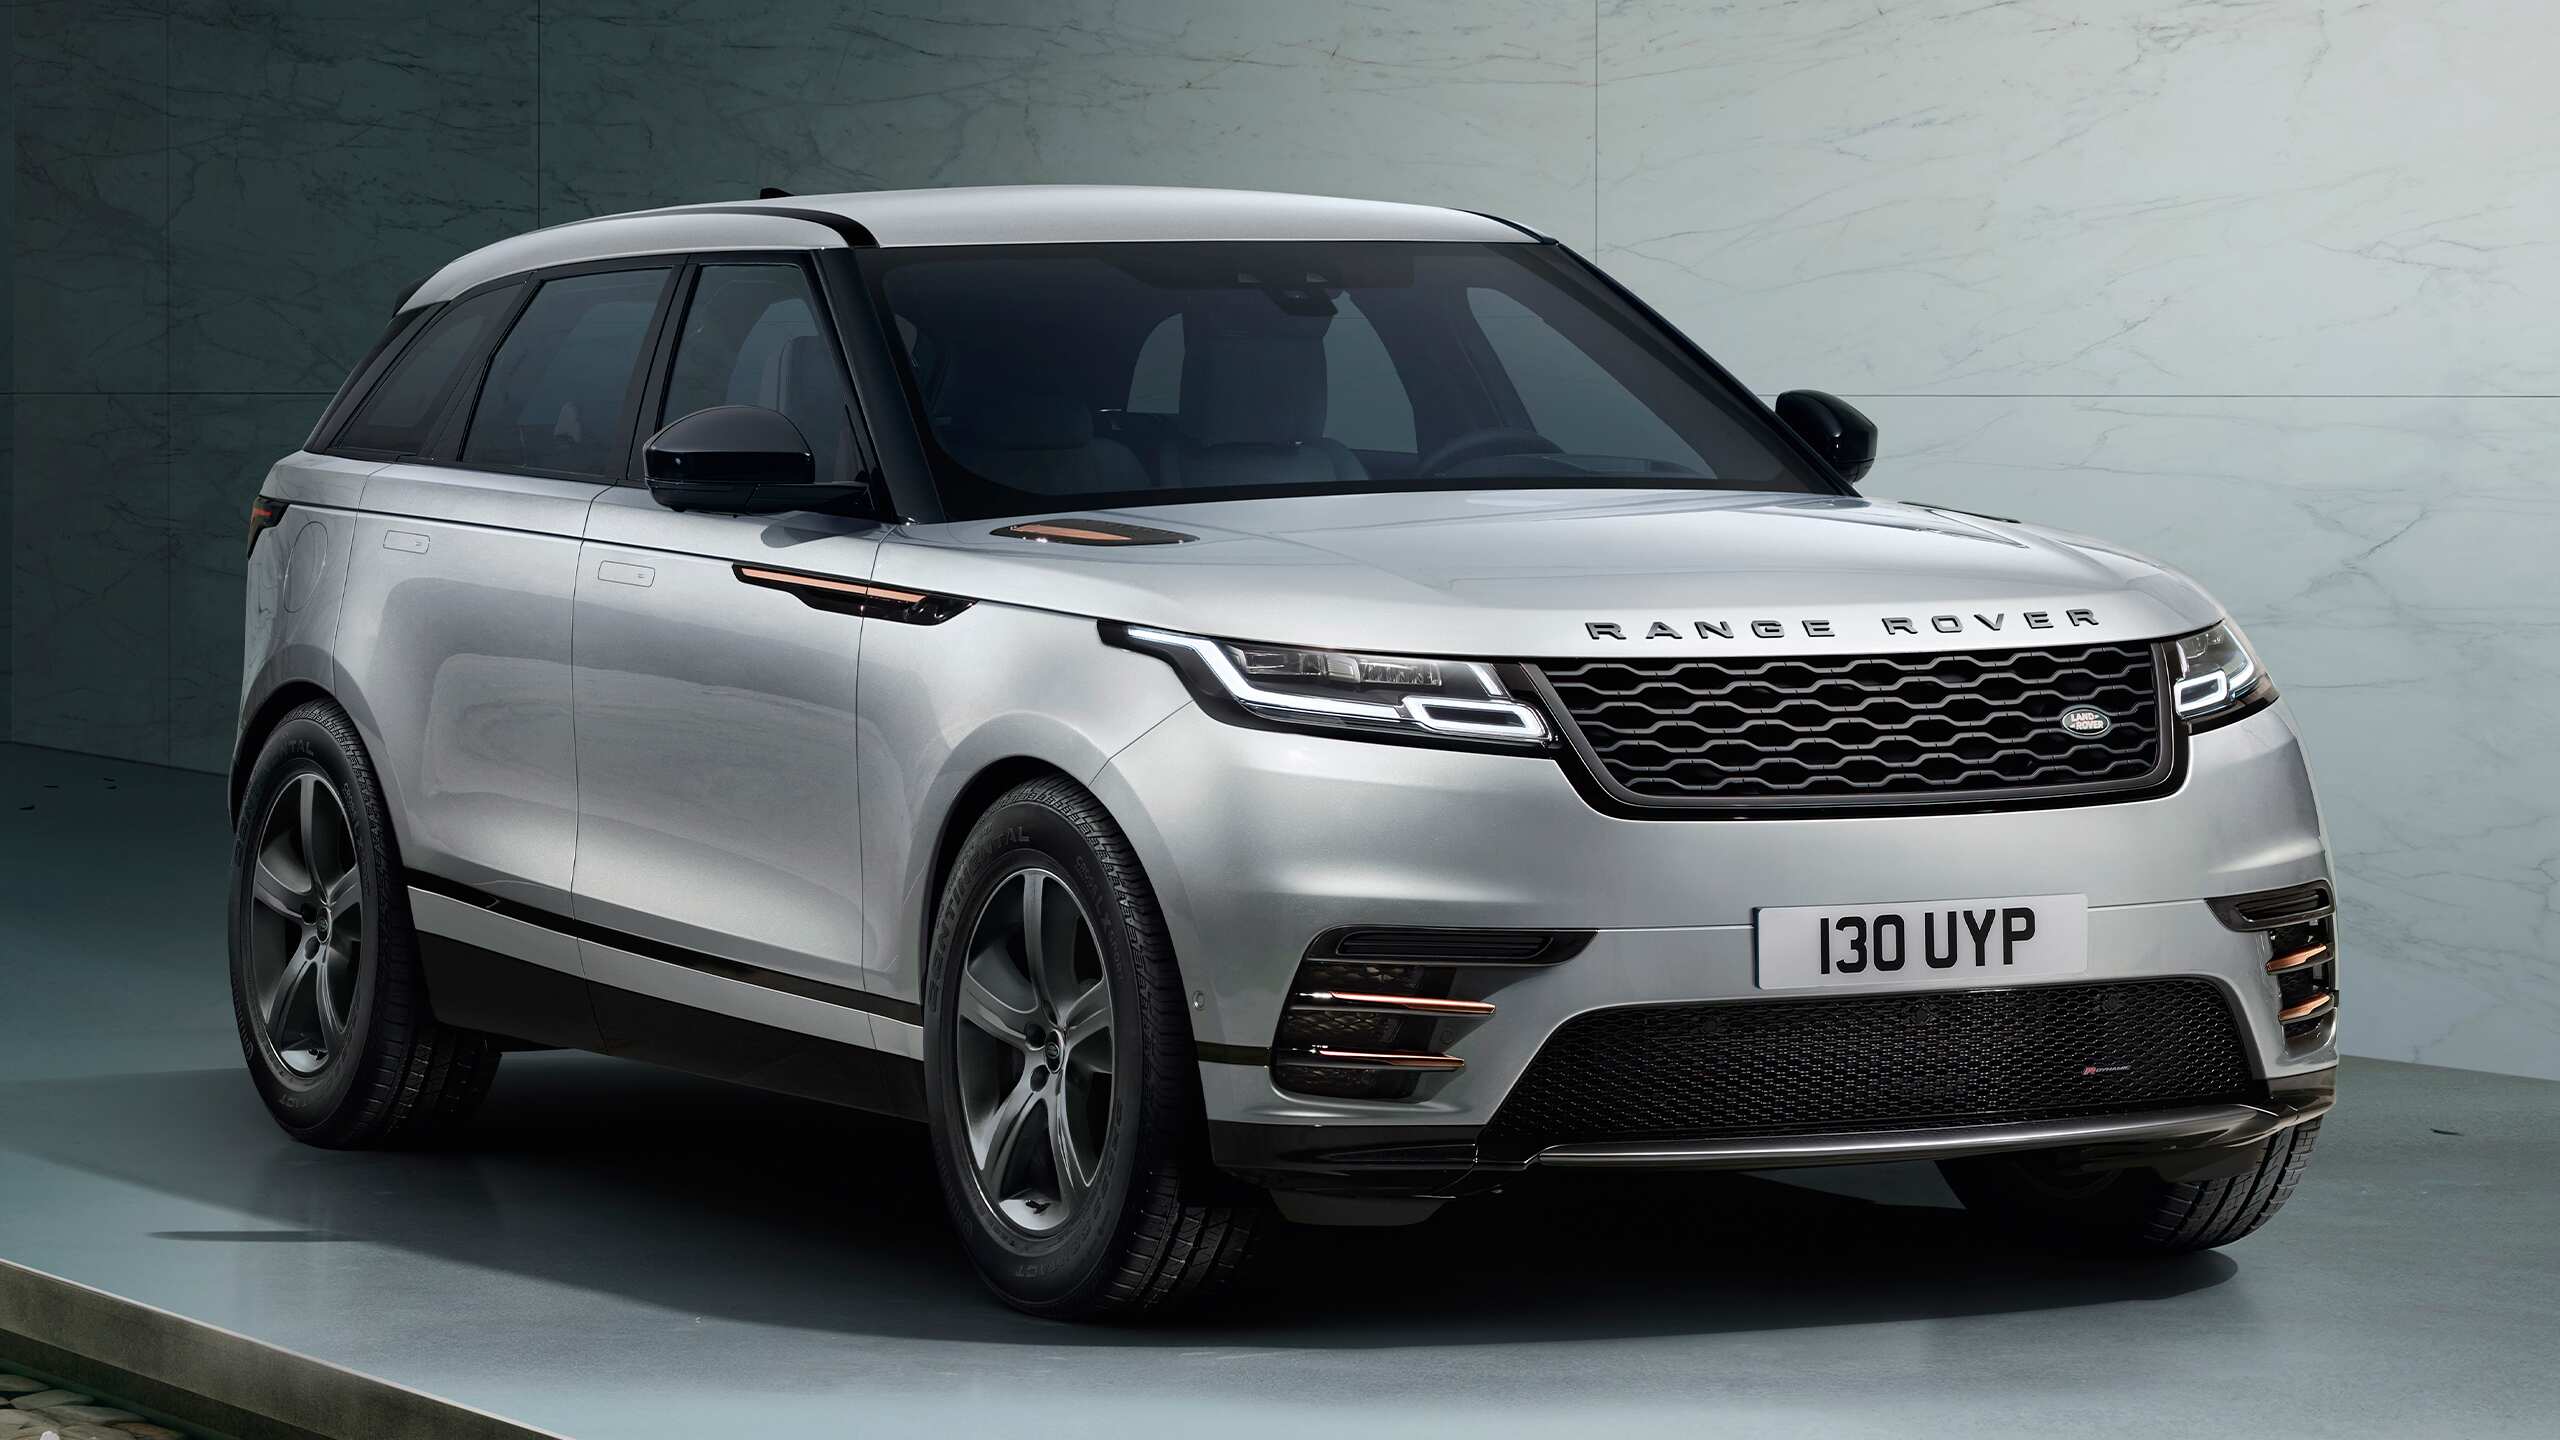 Velar Front Left Profile Presented During The Launch